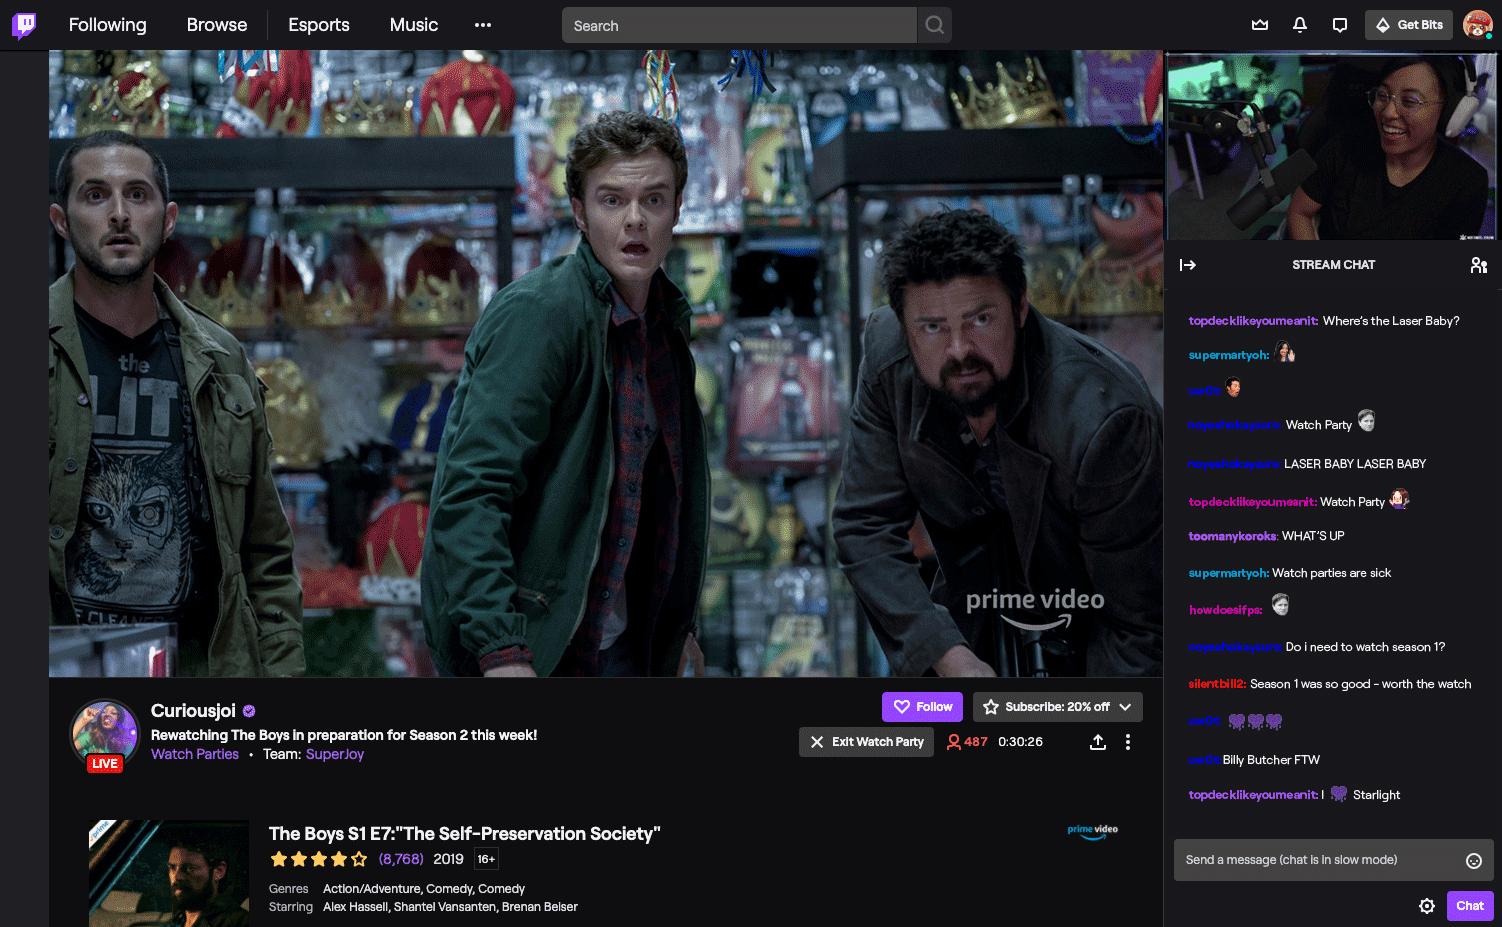 Twitch launches Watch Parties with Prime users watching movies & TV shows together